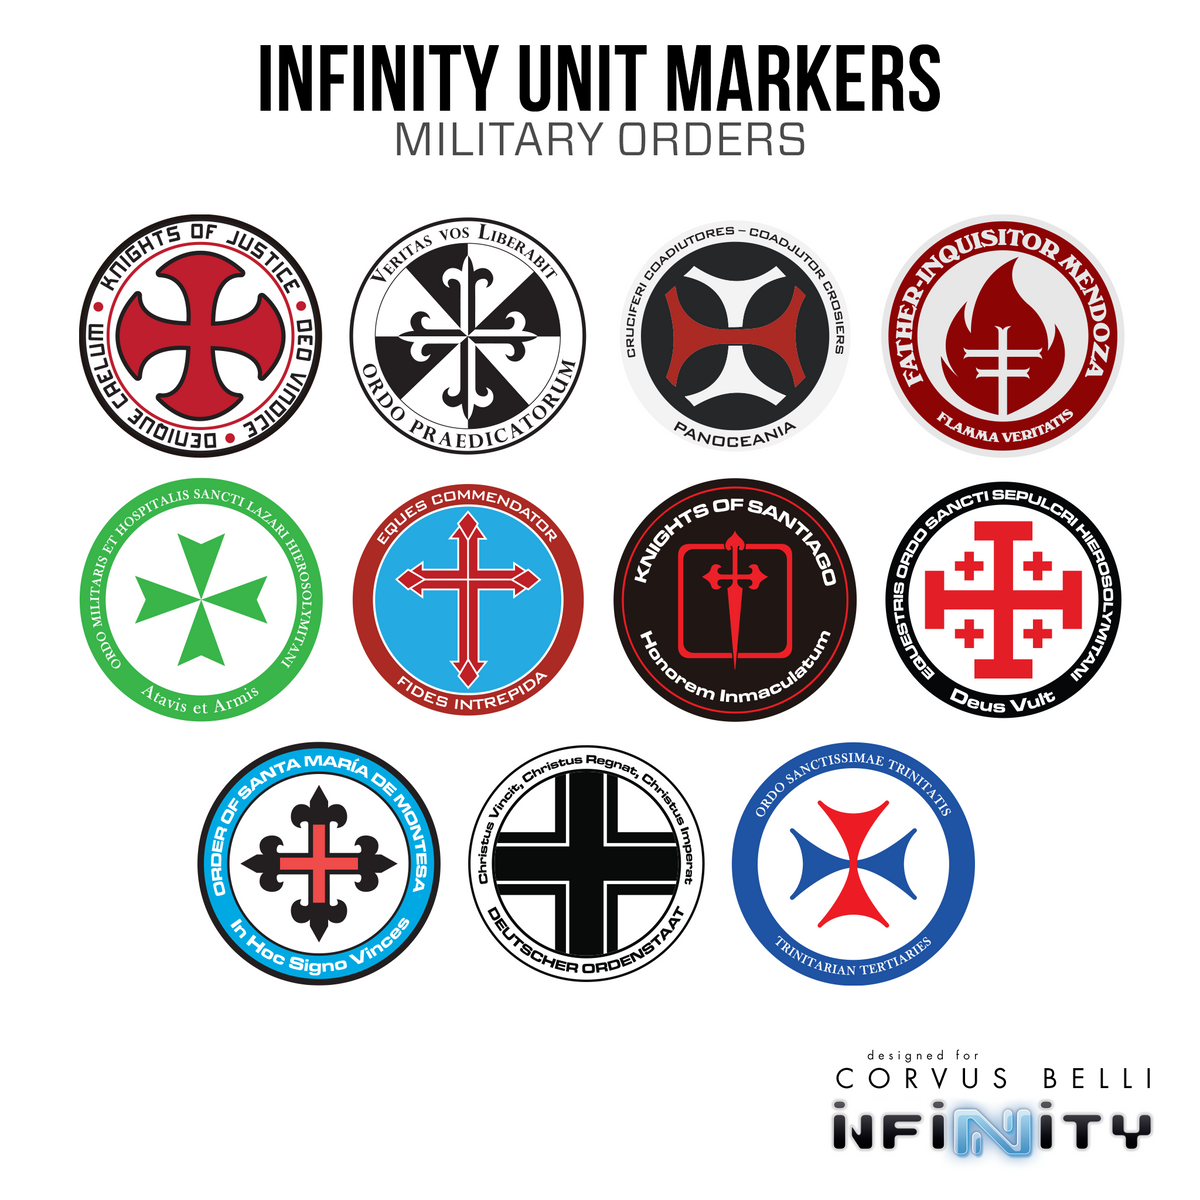 Military Orders Unit Marker Pack